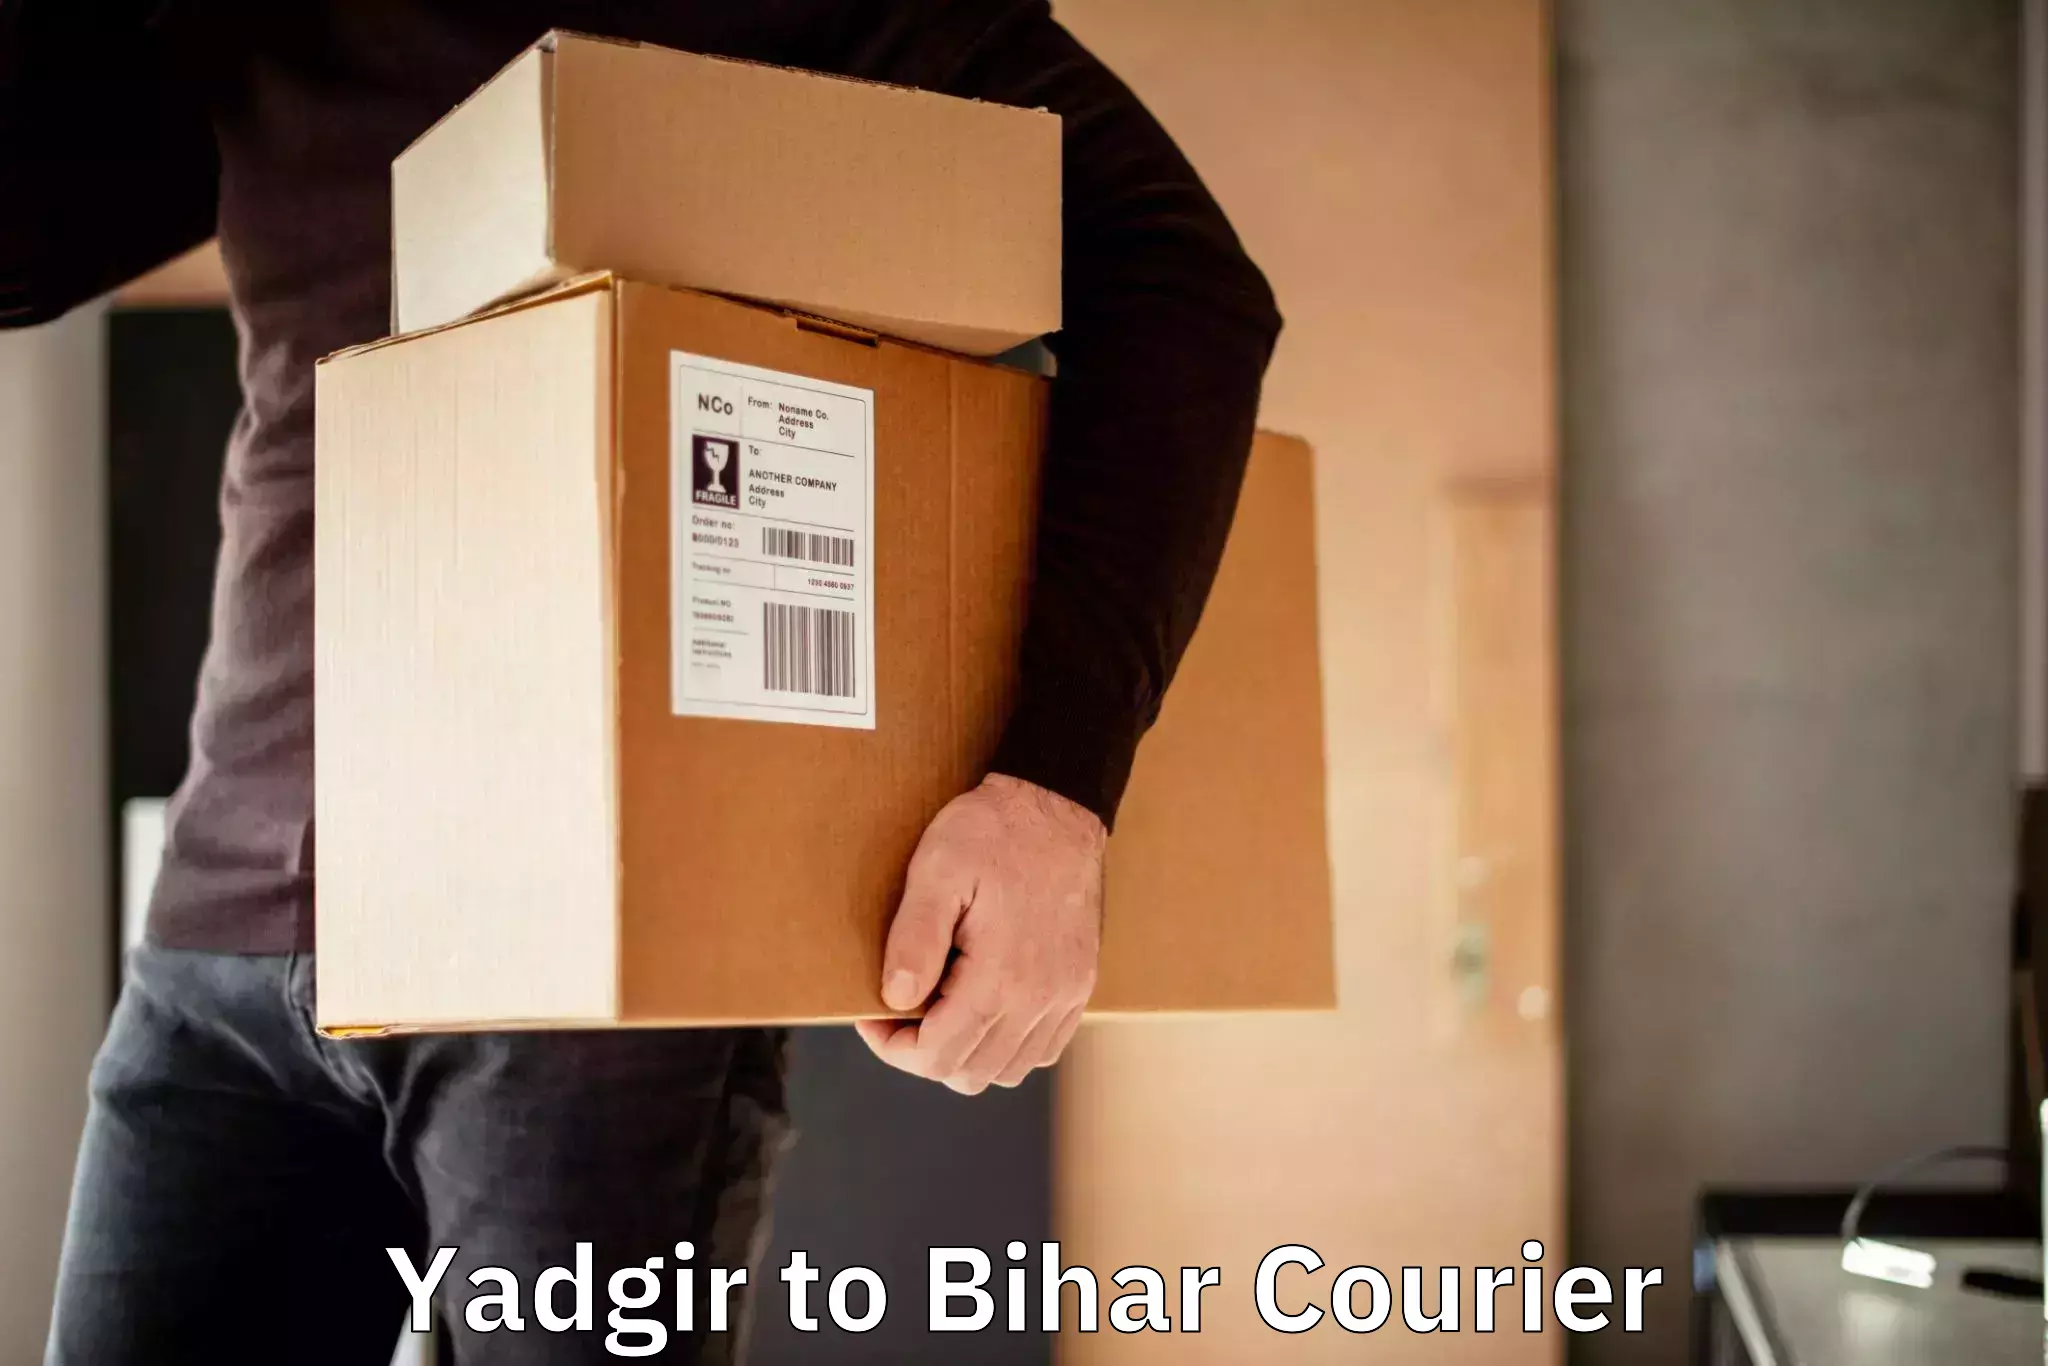 Multi-national courier services Yadgir to Darbhanga